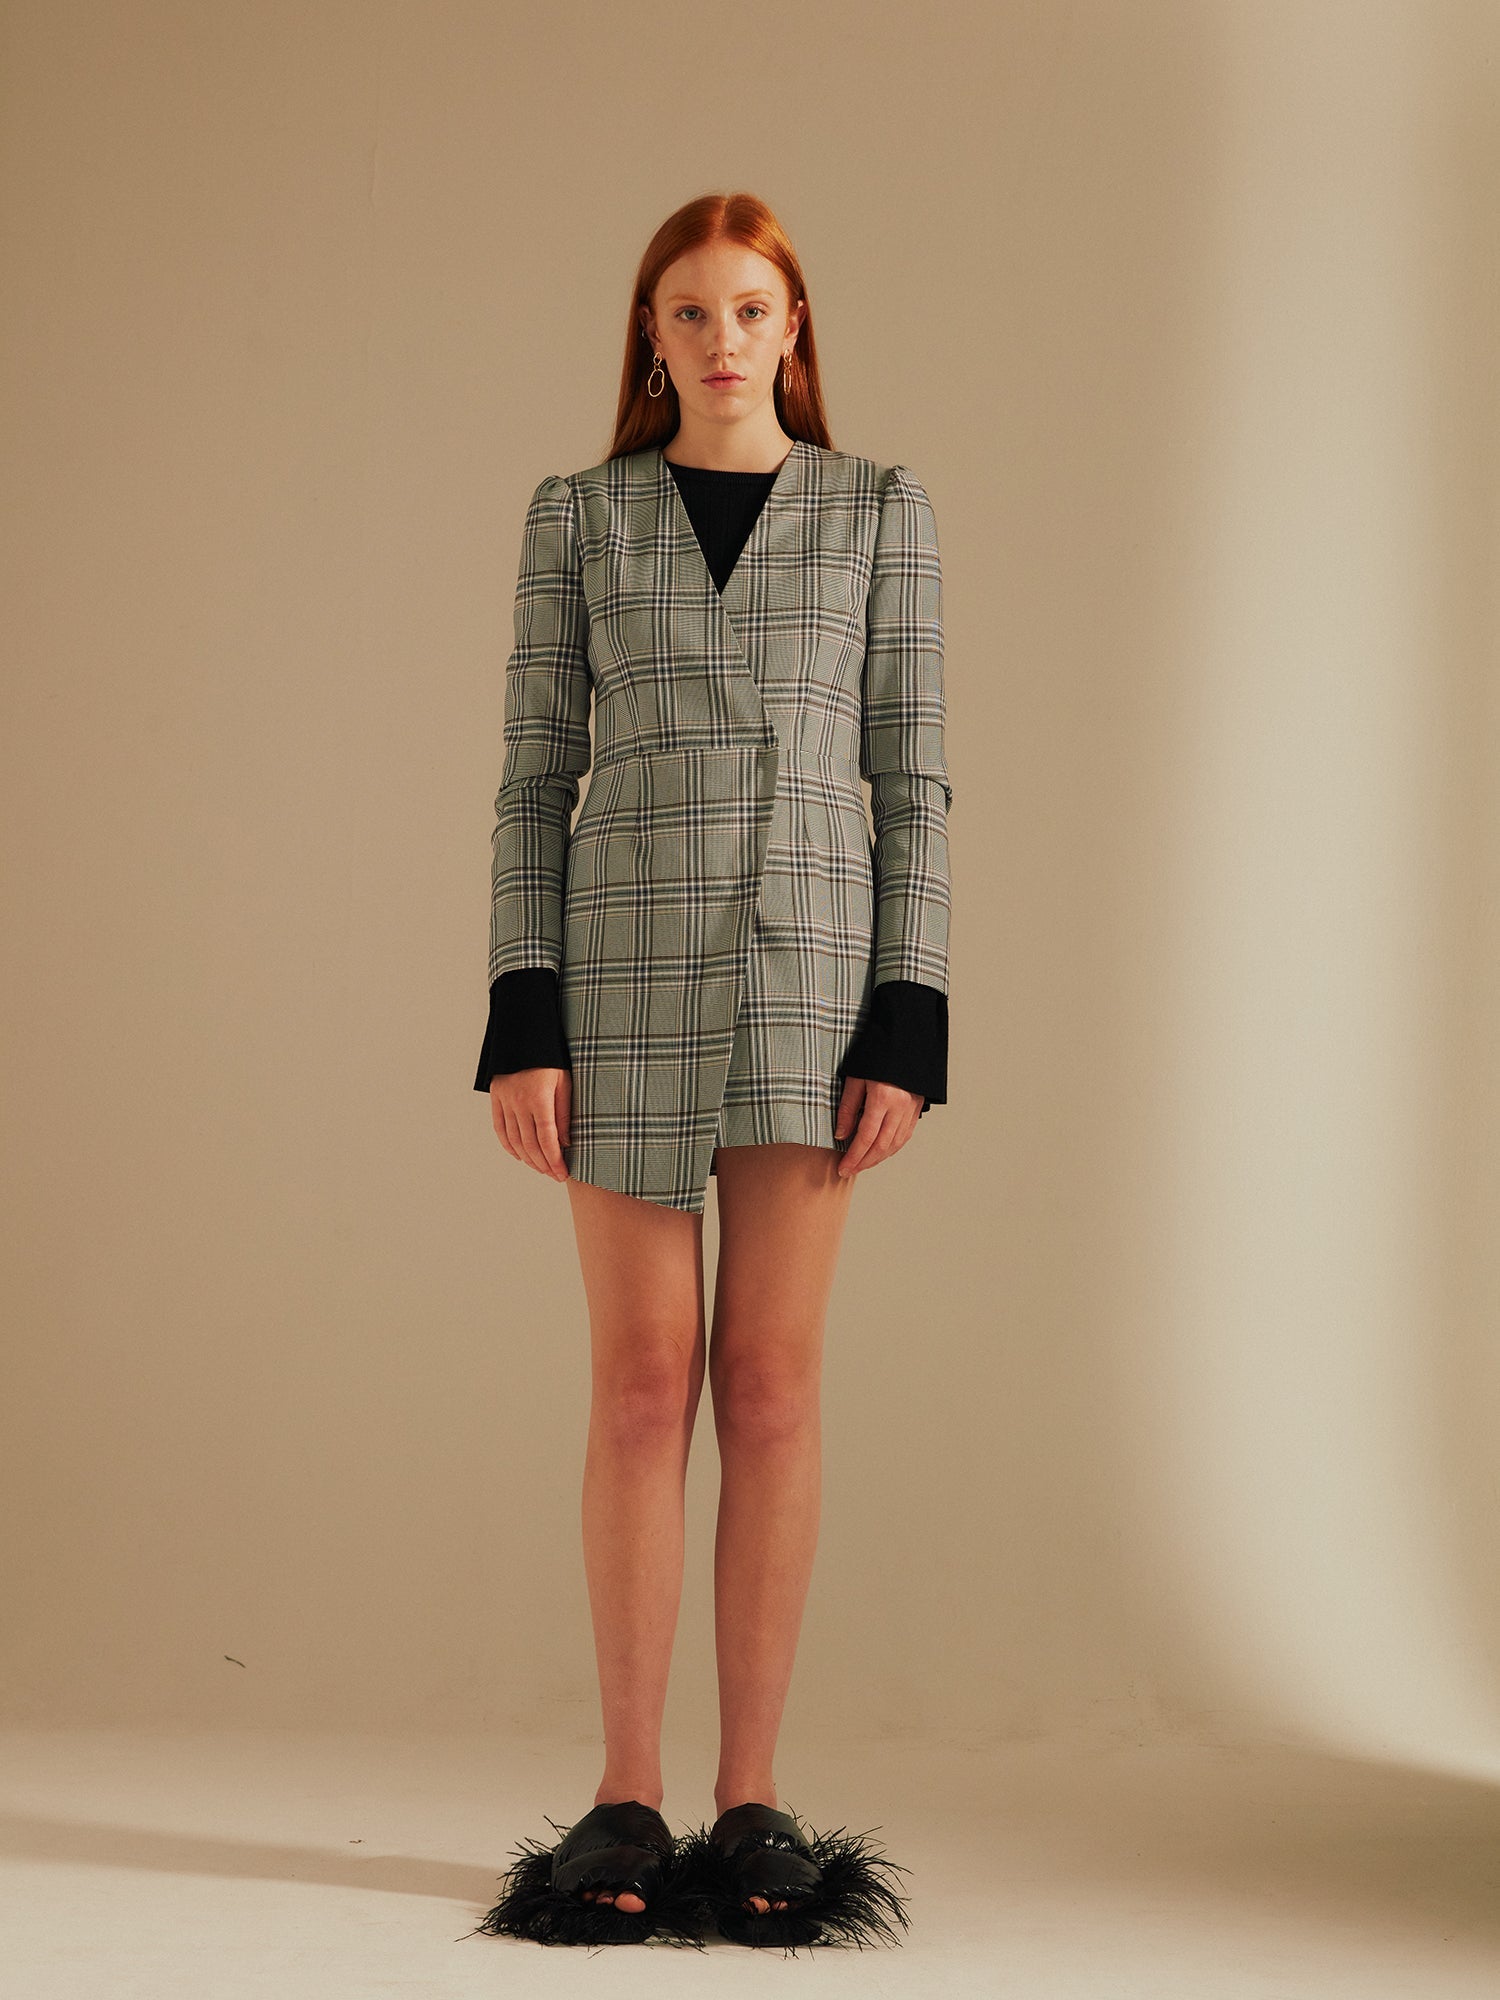 model stands wearing the Amelia Heritage Asymmetric Blazer Dress with fluffy slippers